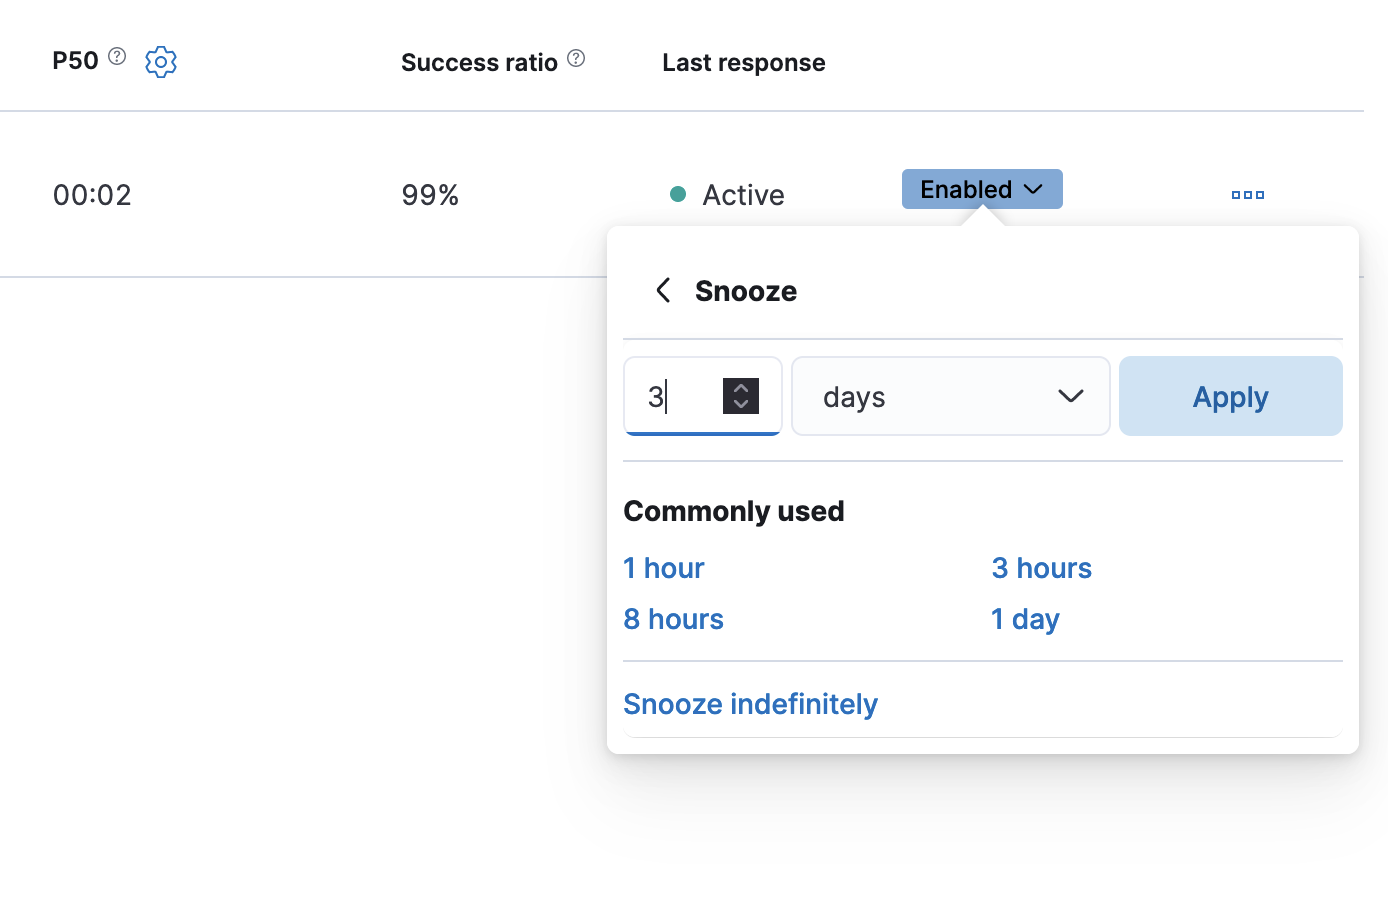 The snooze panel allows you to set the length of a rule’s snooze period